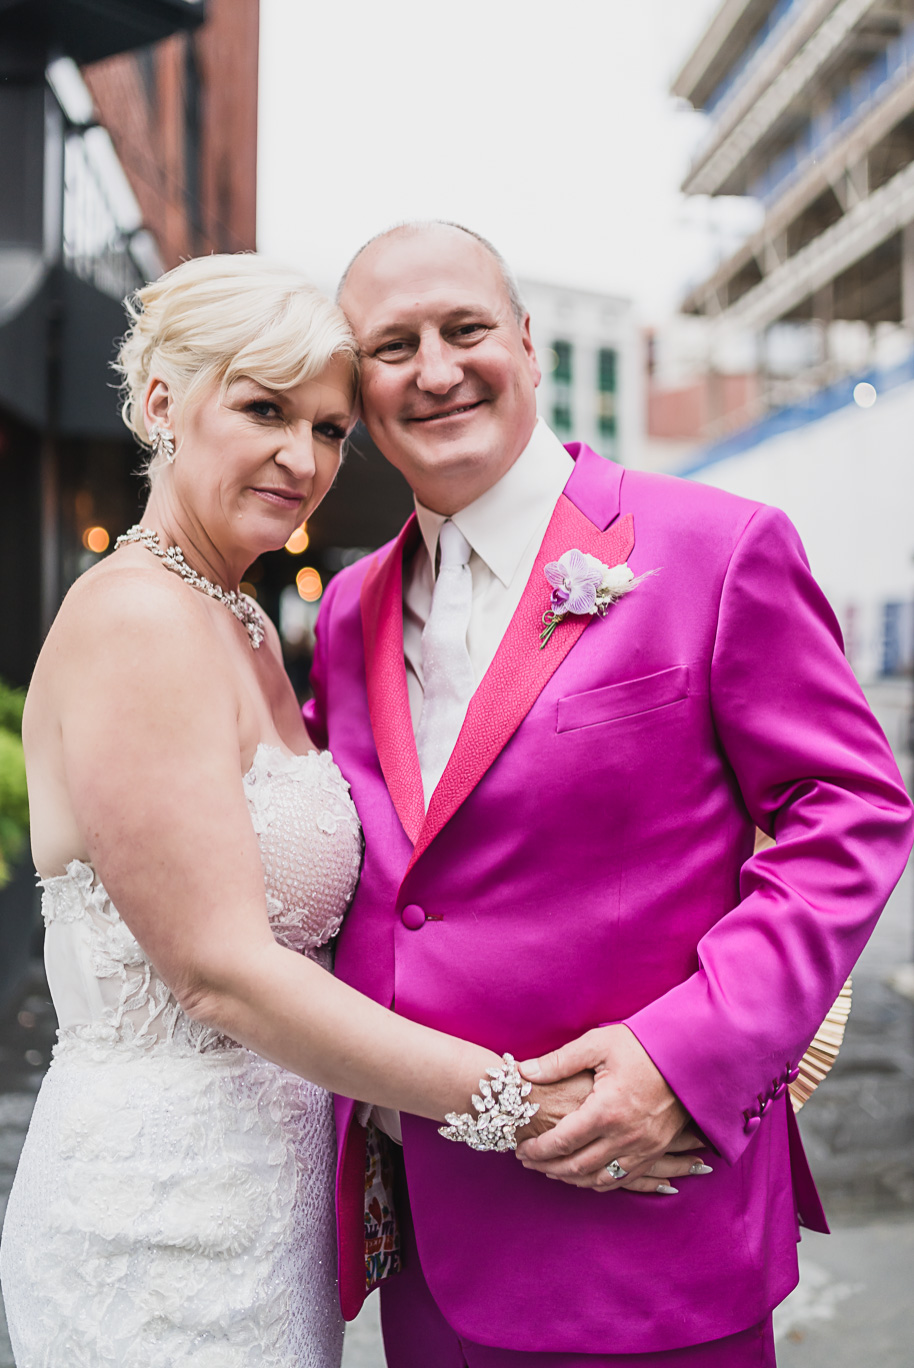 Colorful swanky black tie Shinola wedding at the Shinola Hotel in downtown Detroit, Michigan provided by Kari Dawson, top-rated Detroit wedding photographer and her team.